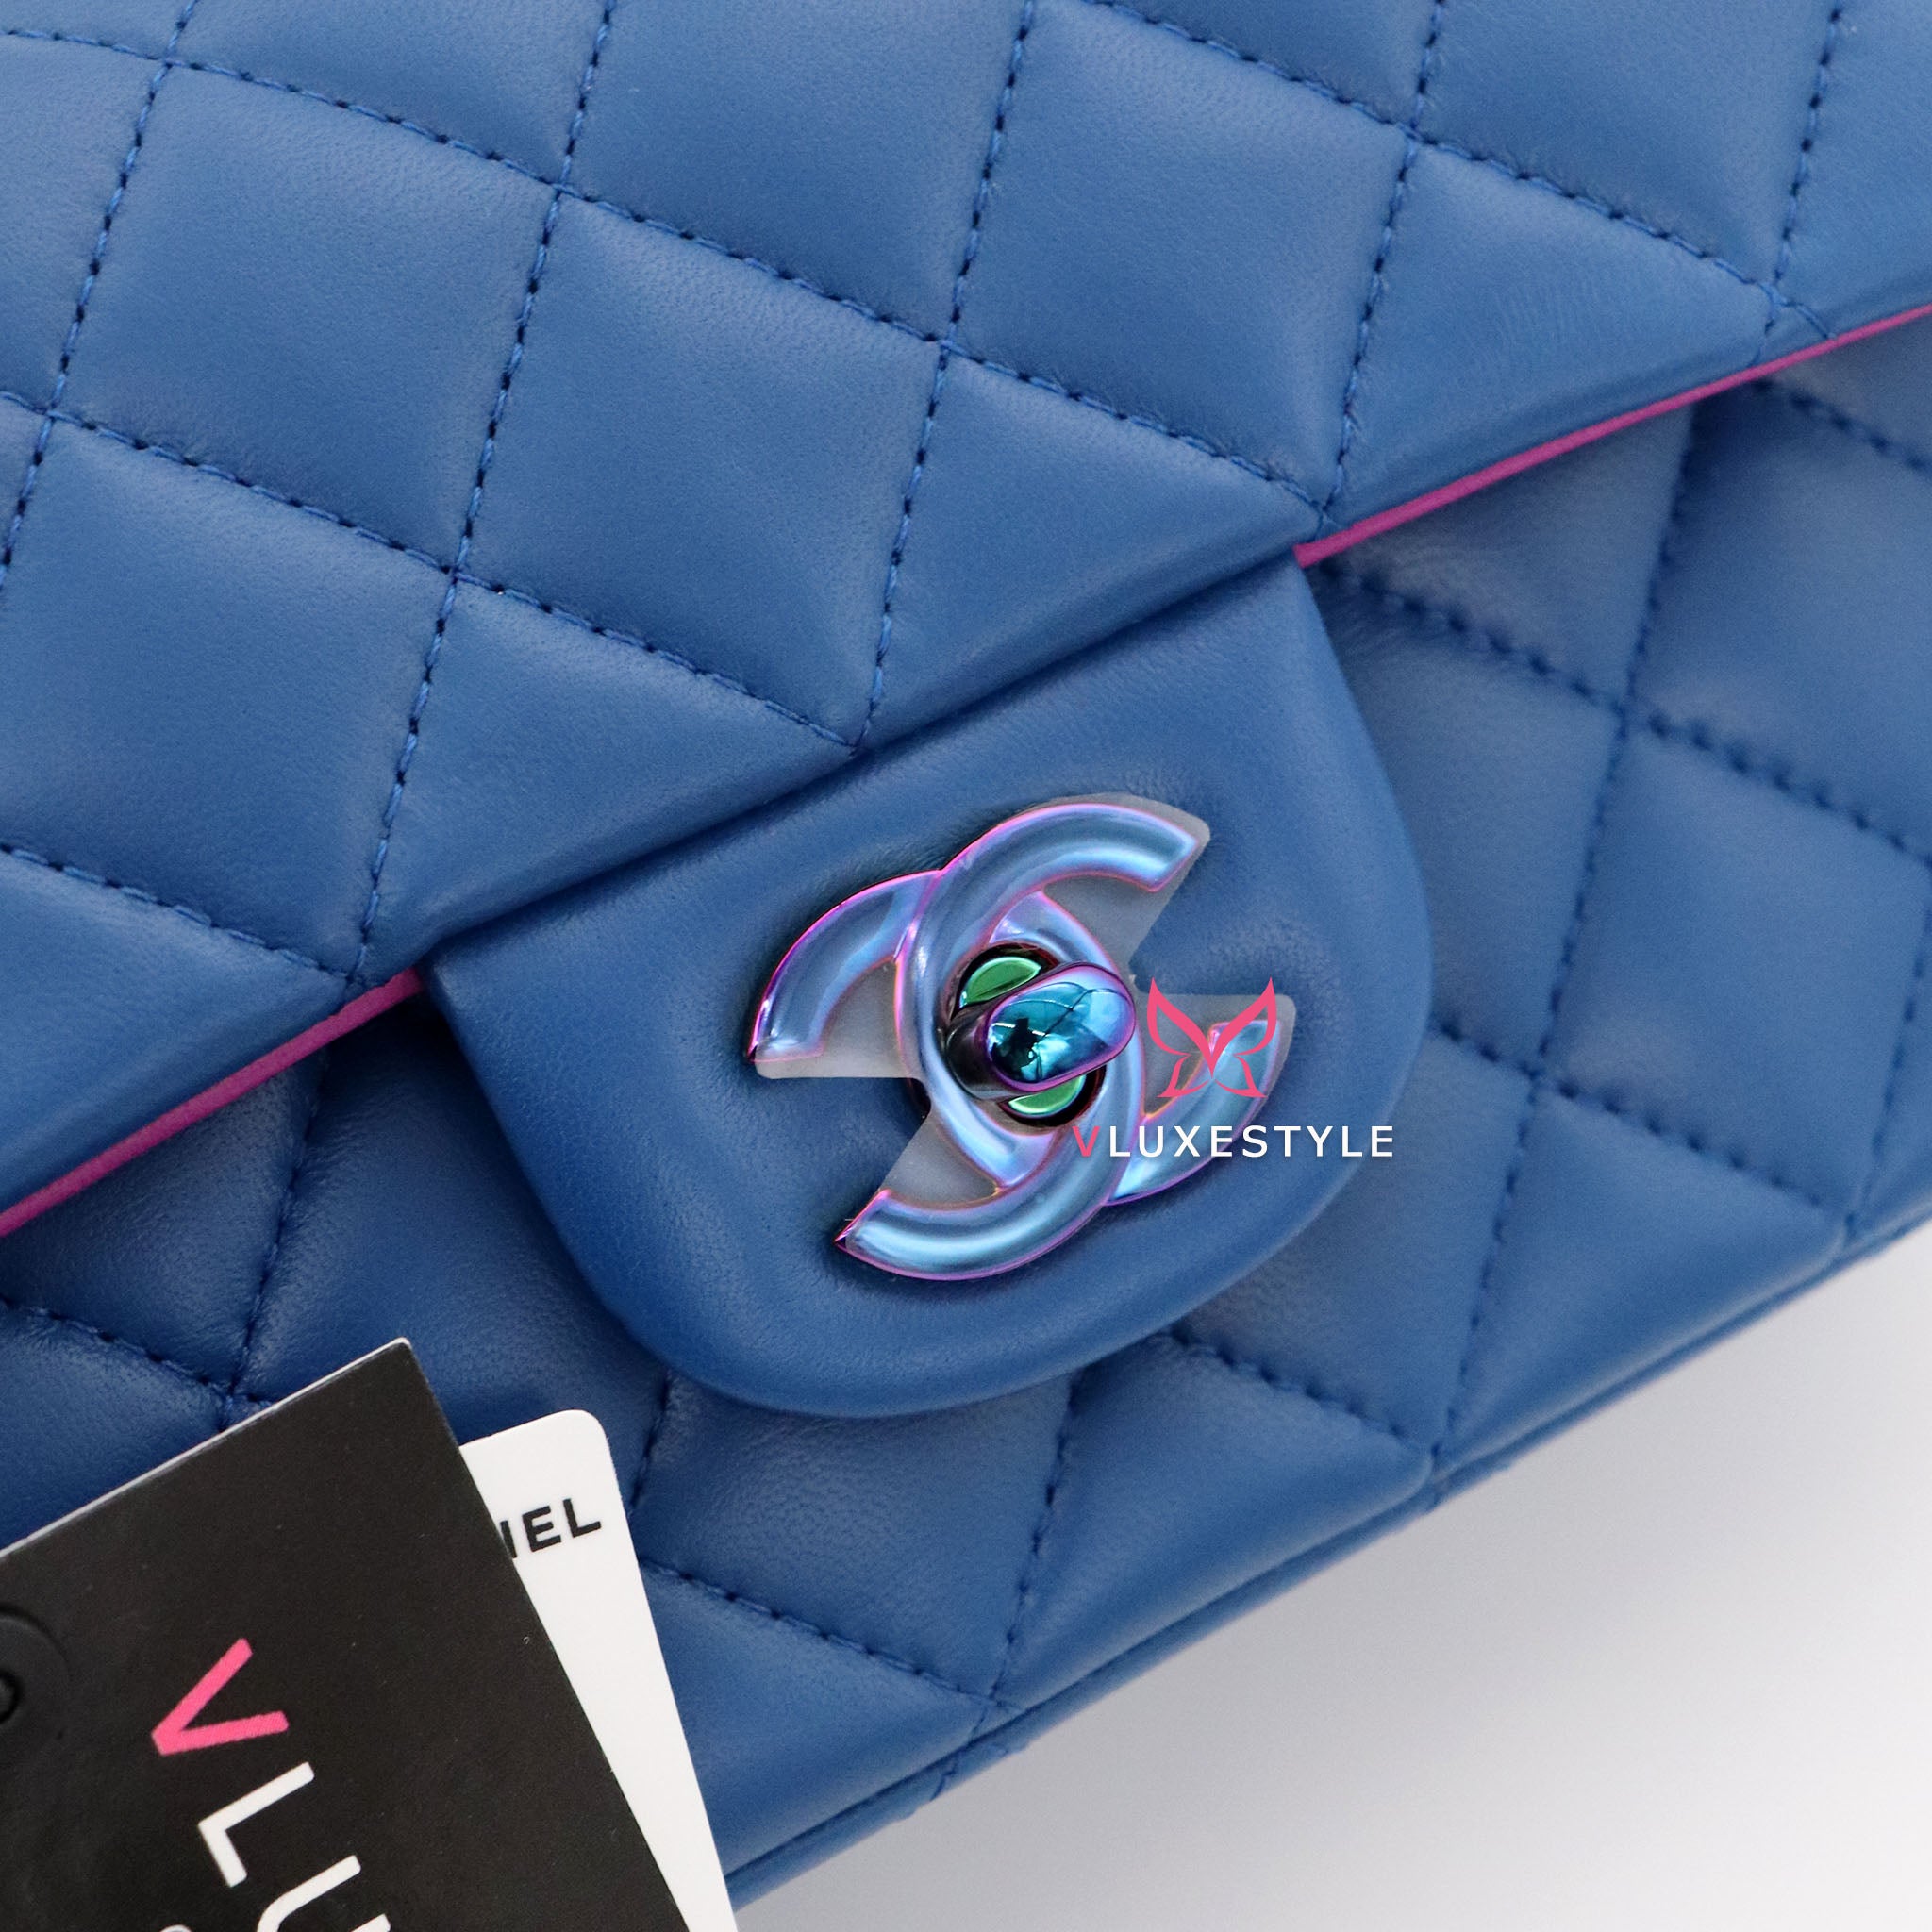 Chanel Classic Mini Rectangular 21P Blue Quilted Lambskin with